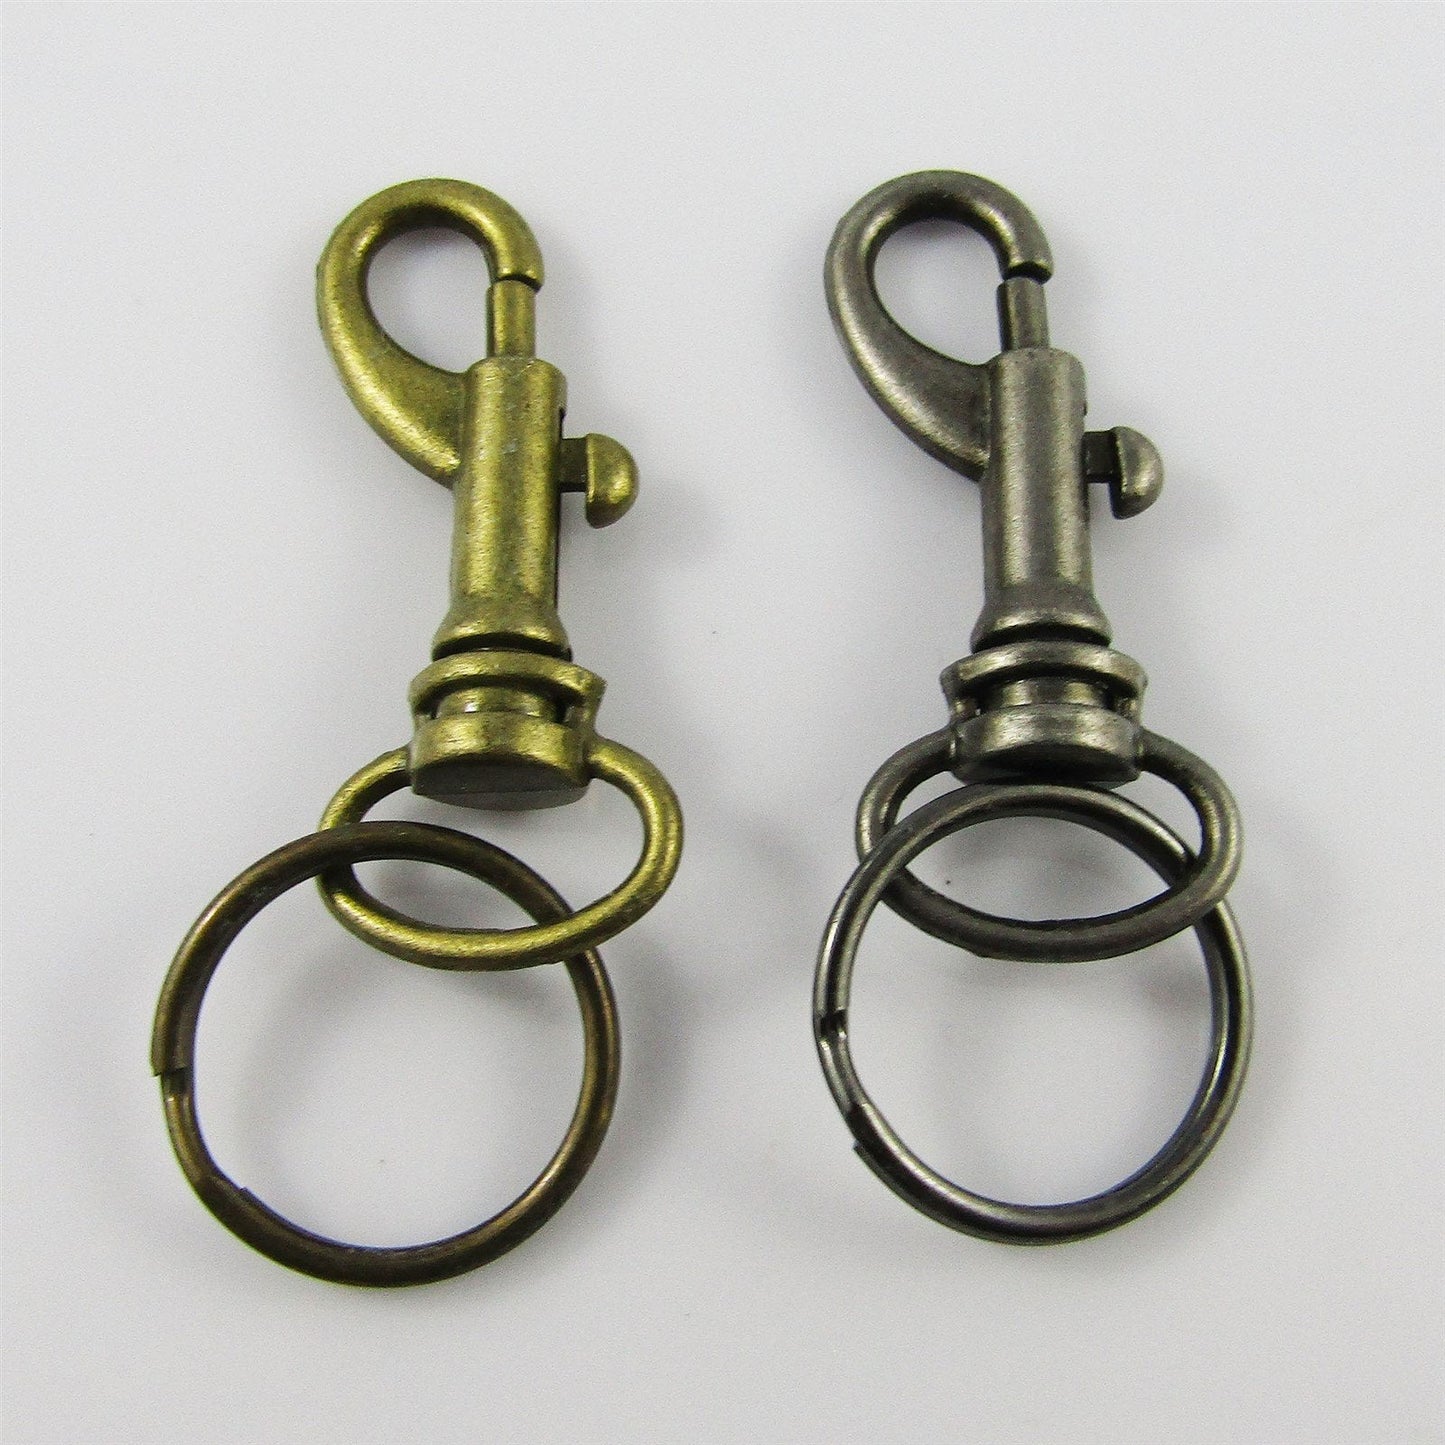 Bulk x5 Trigger Clasp Key Ring Keychain Finding 39mm Alloy Select Colour